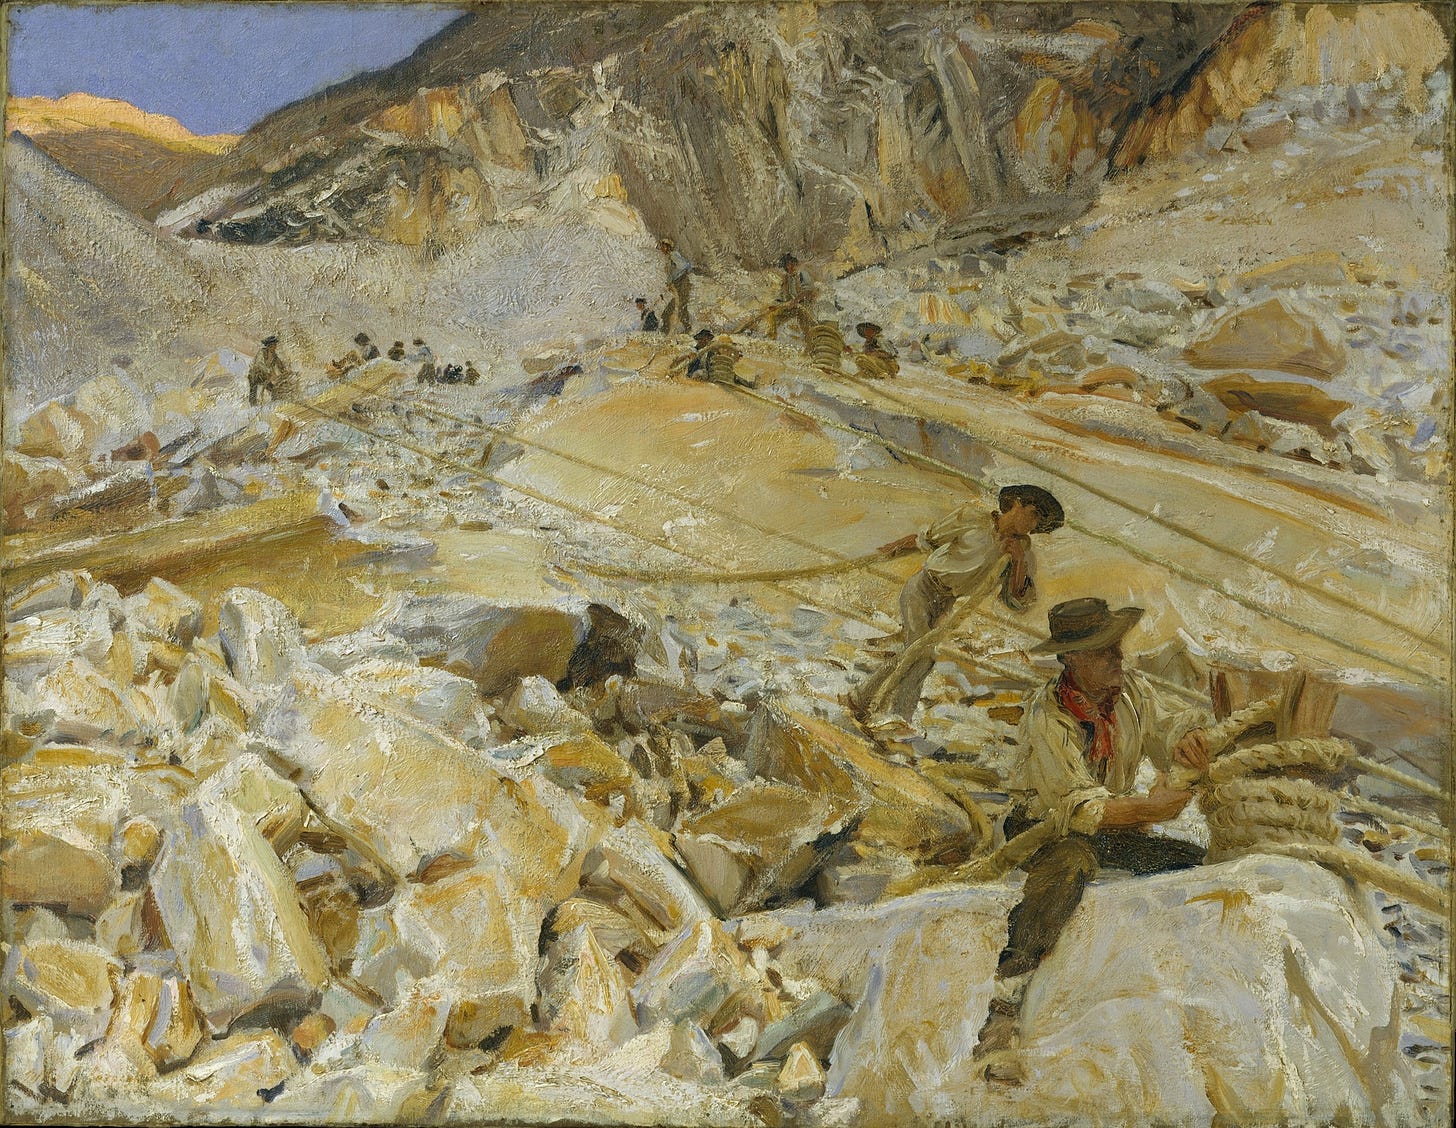 Bringing down marble from the quarries to Carrara (1911)